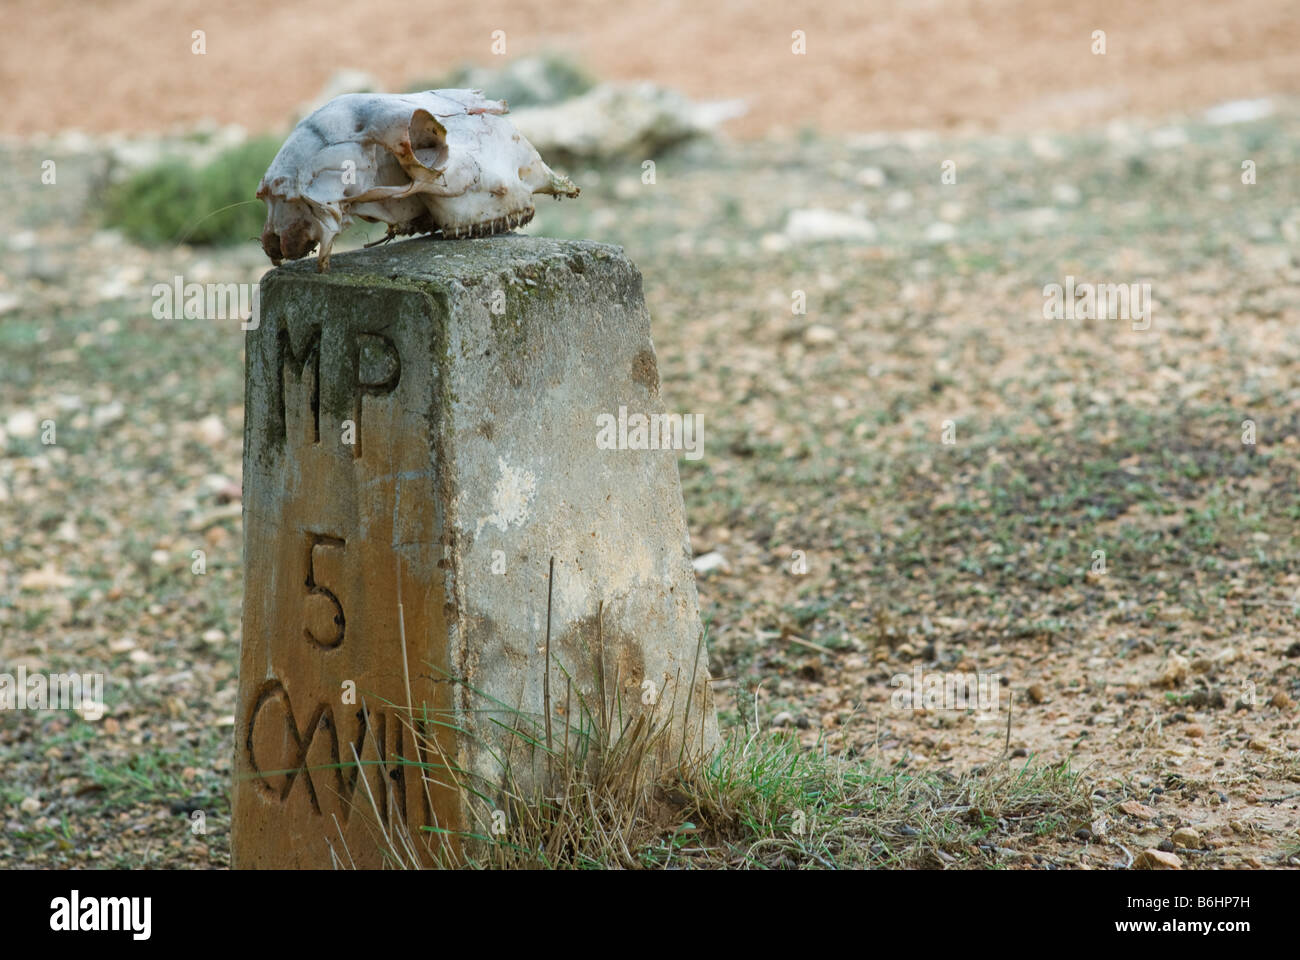 Sheep skull laying on a stone property marker in Almansa, Spain Stock Photo